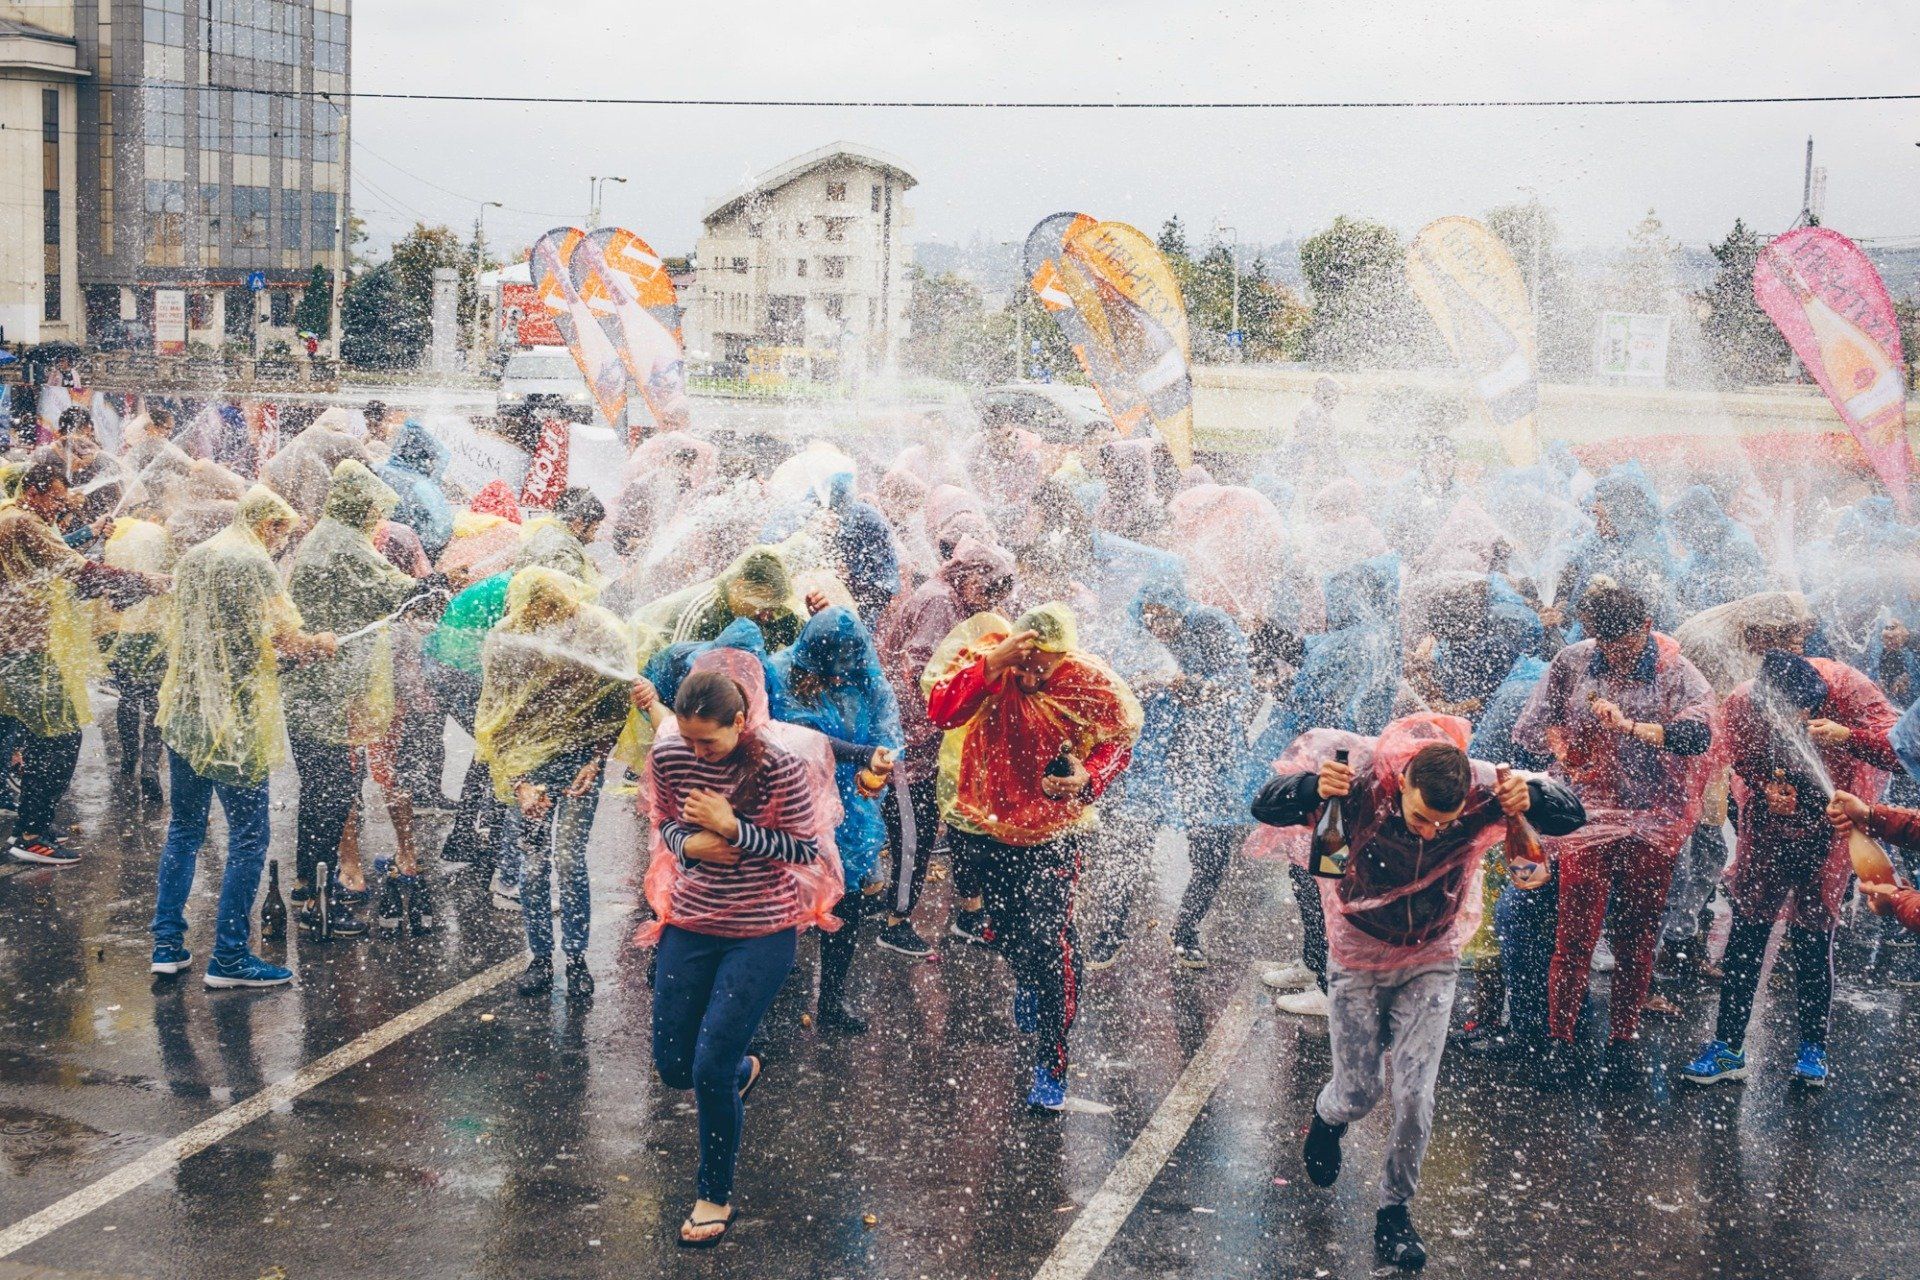 Largest champagne/sparkling wine fight: The Cotnary Winery sets world record